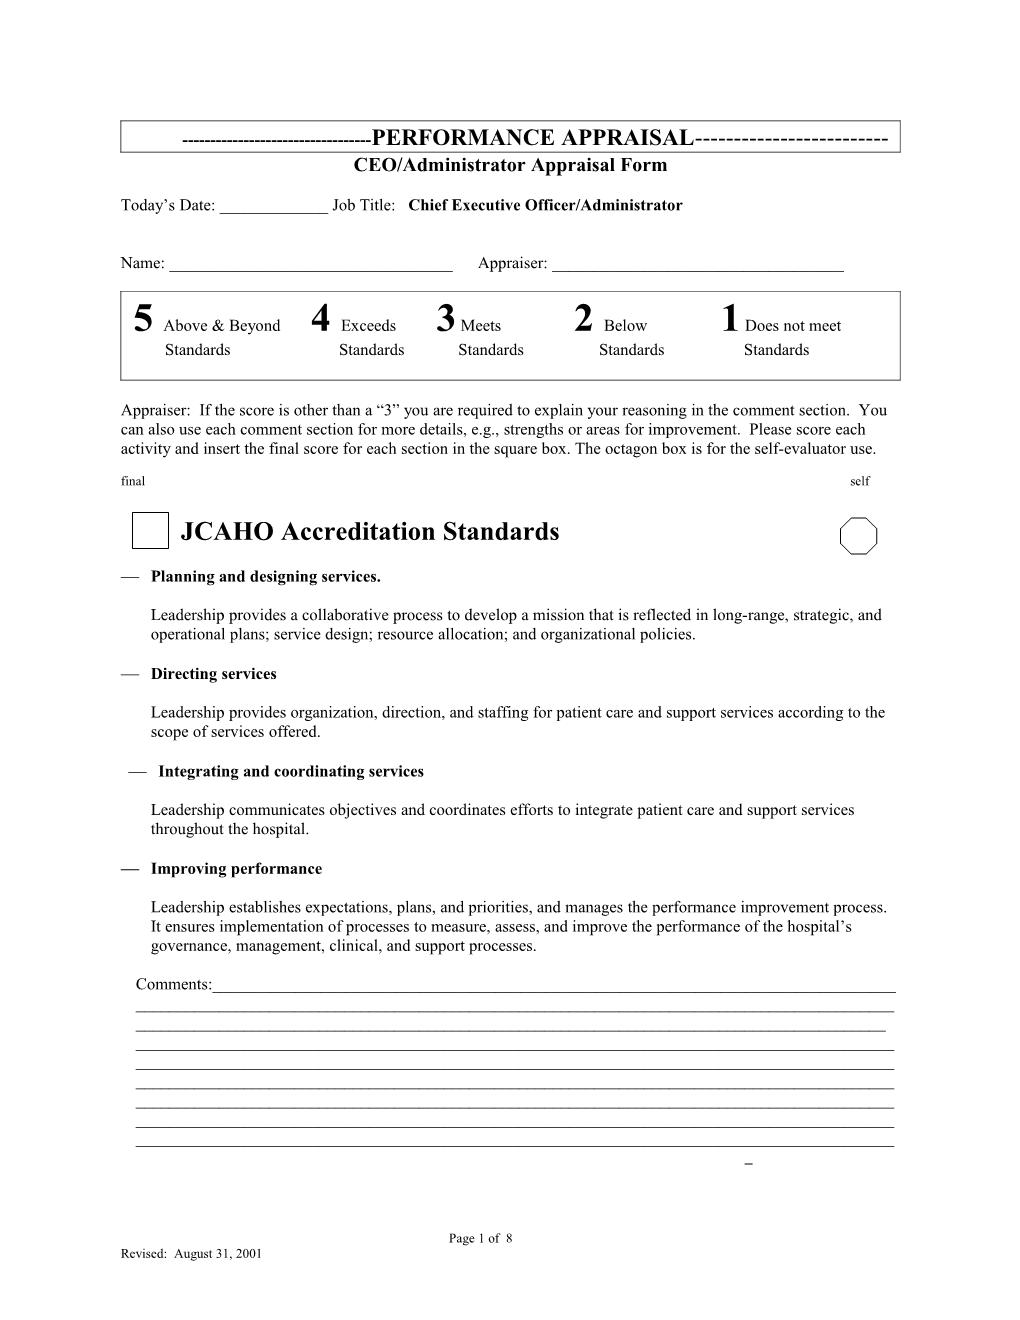 CEO/Administrator Appraisal Form